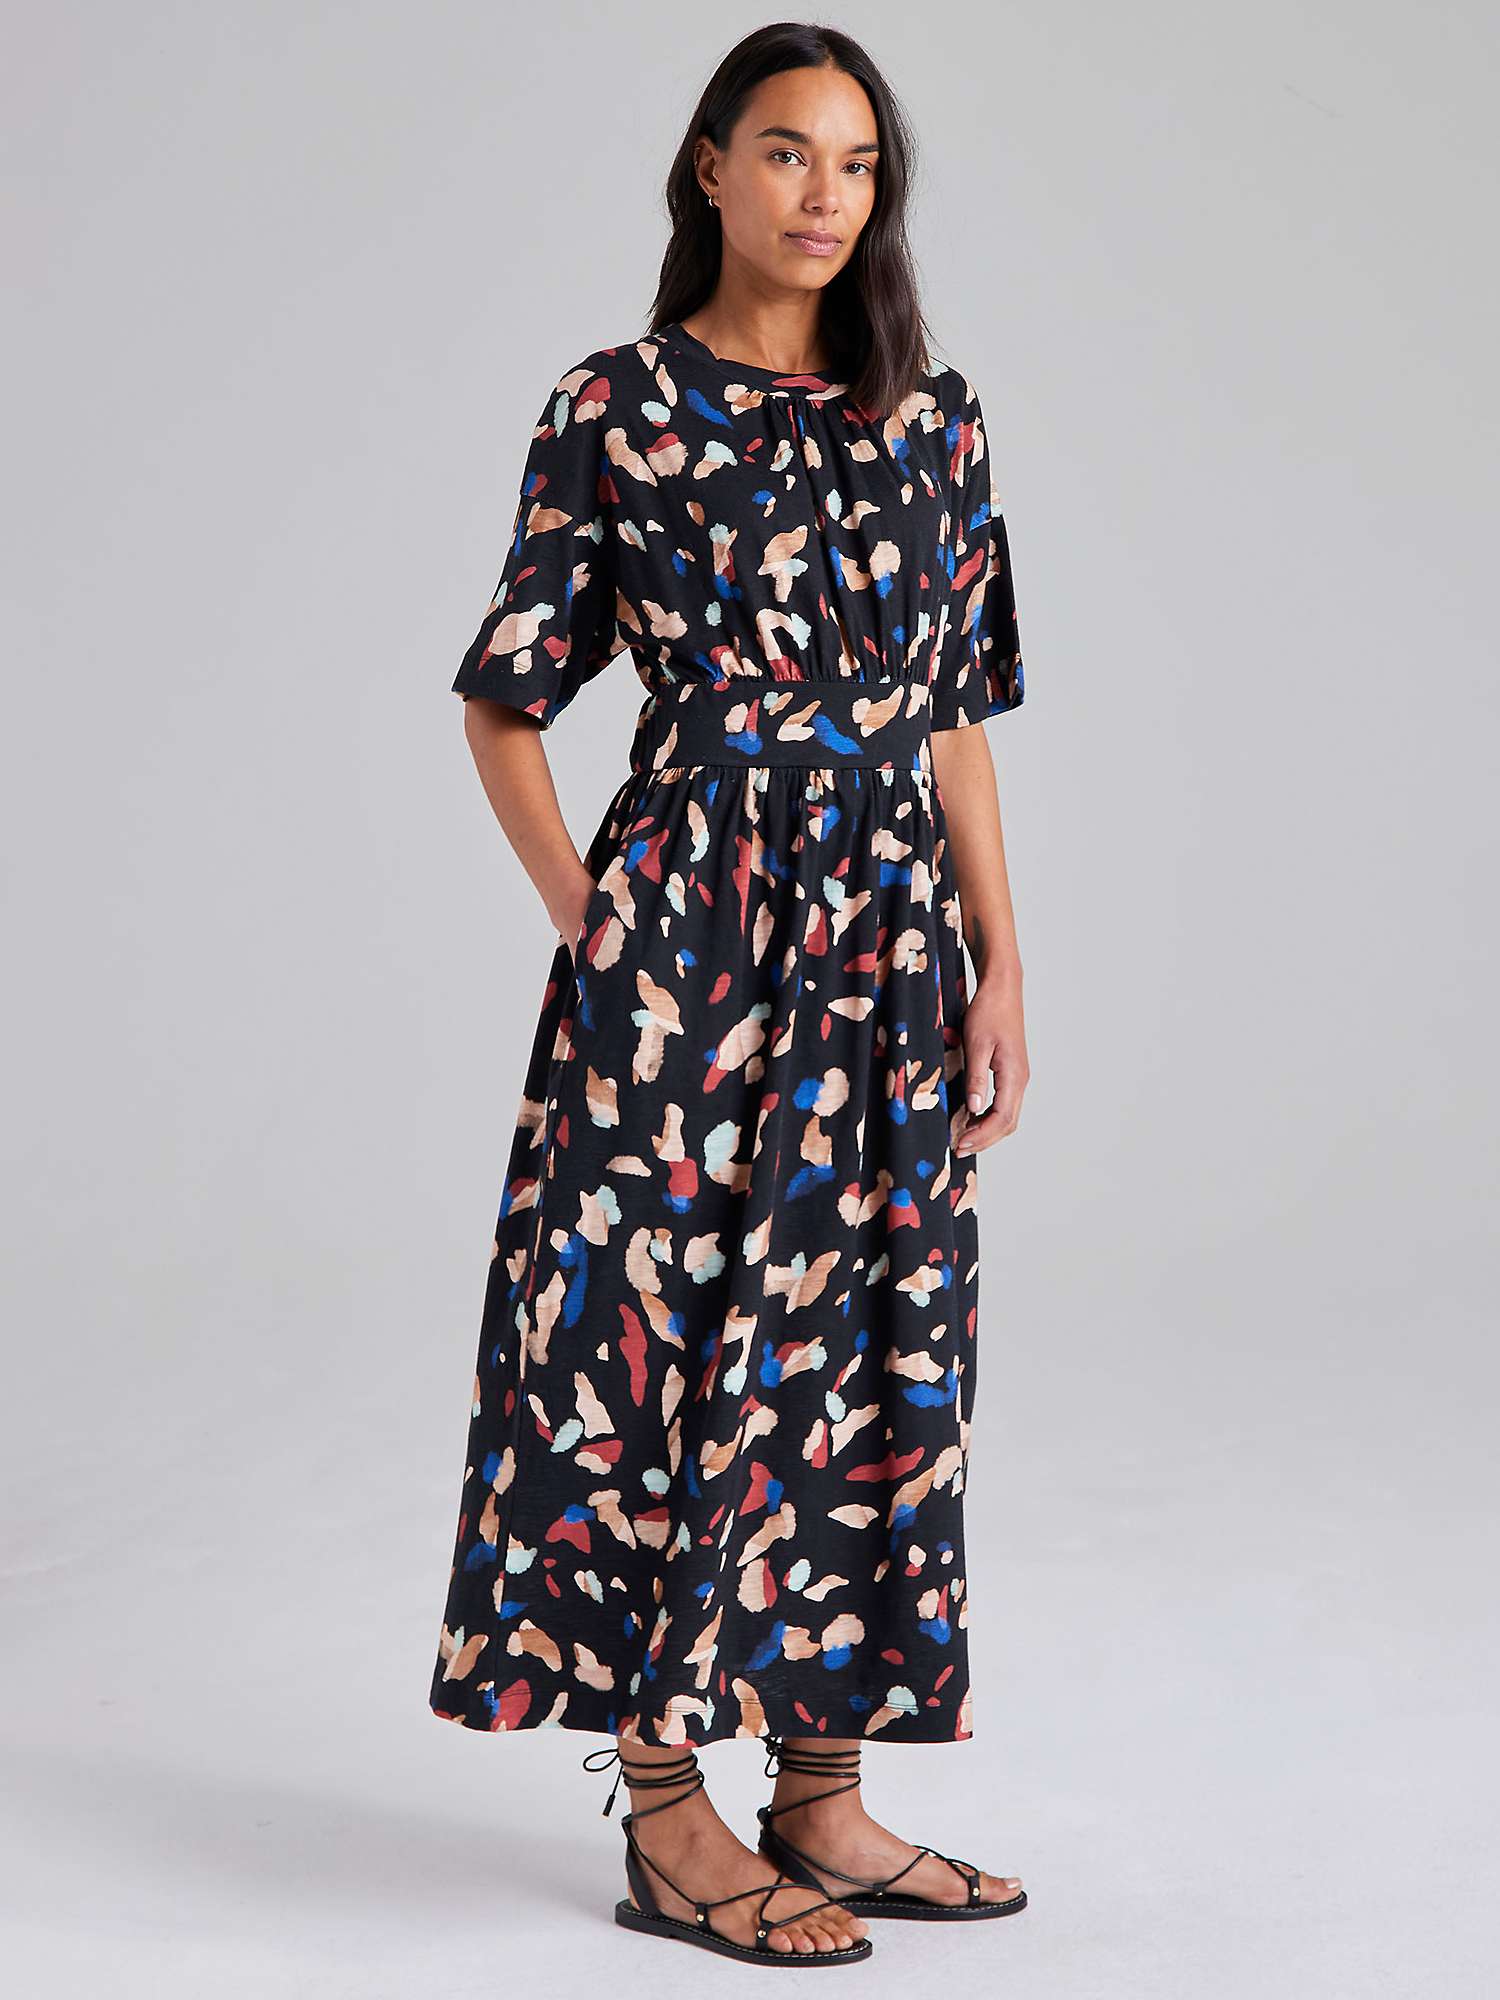 Buy Cape Cove Smugle Abstract Print Jersey Midi Dress, Black/Multi Online at johnlewis.com